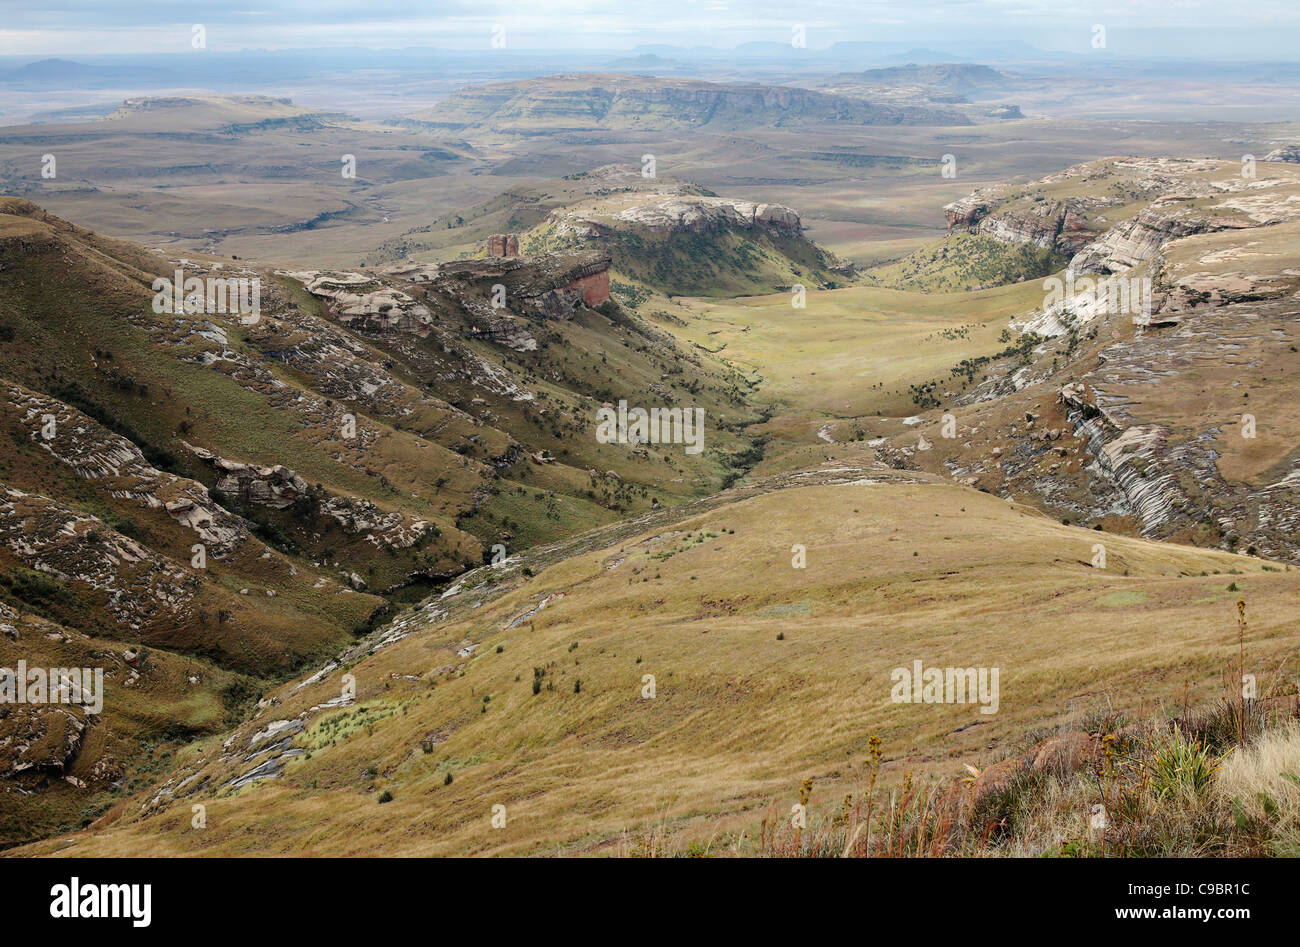 View of Maluti Mountains, Golden Gate Highlands National Park, Free State Province, South Africa Stock Photo